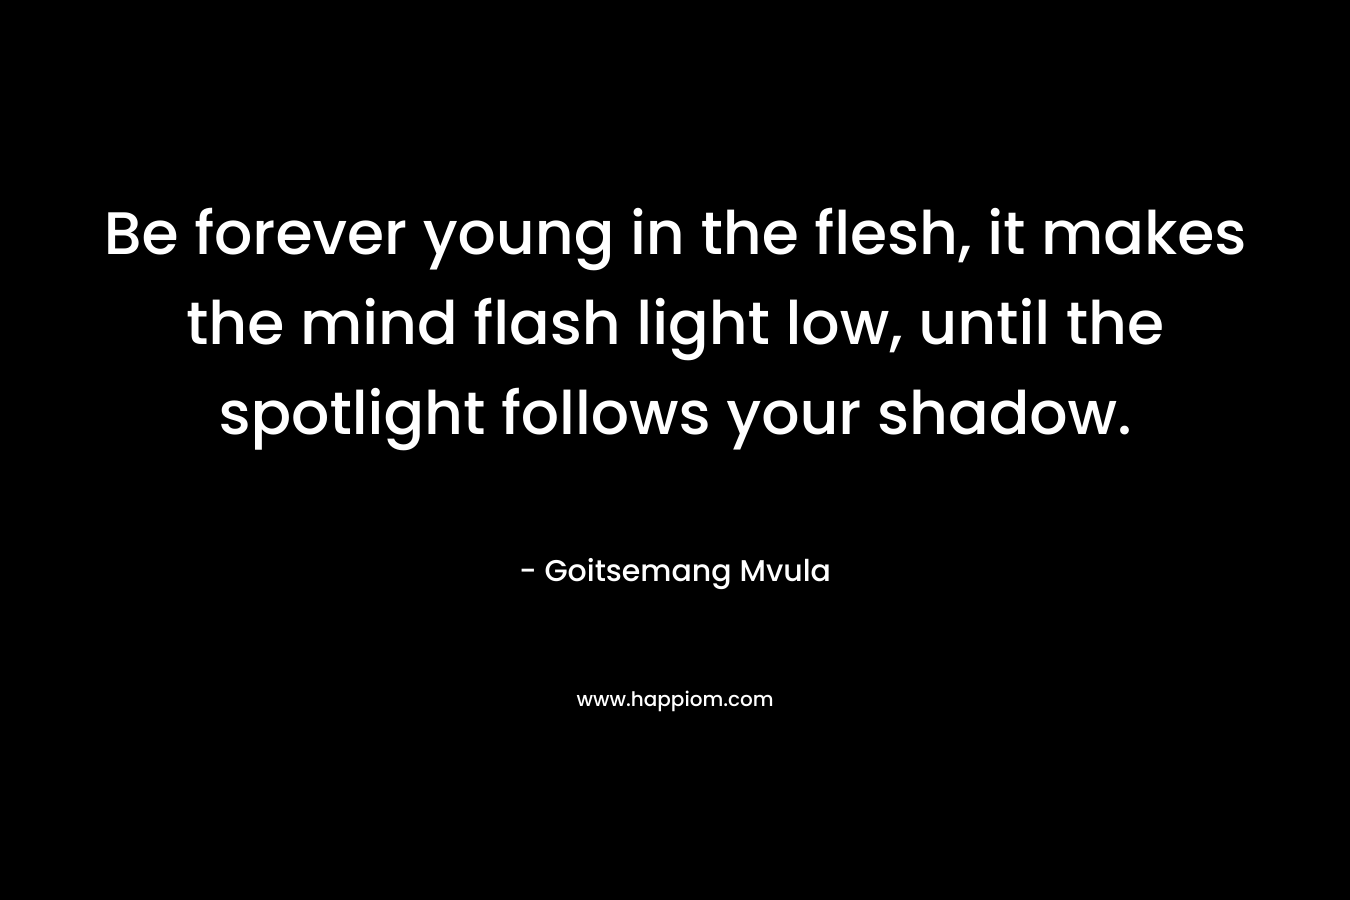 Be forever young in the flesh, it makes the mind flash light low, until the spotlight follows your shadow.